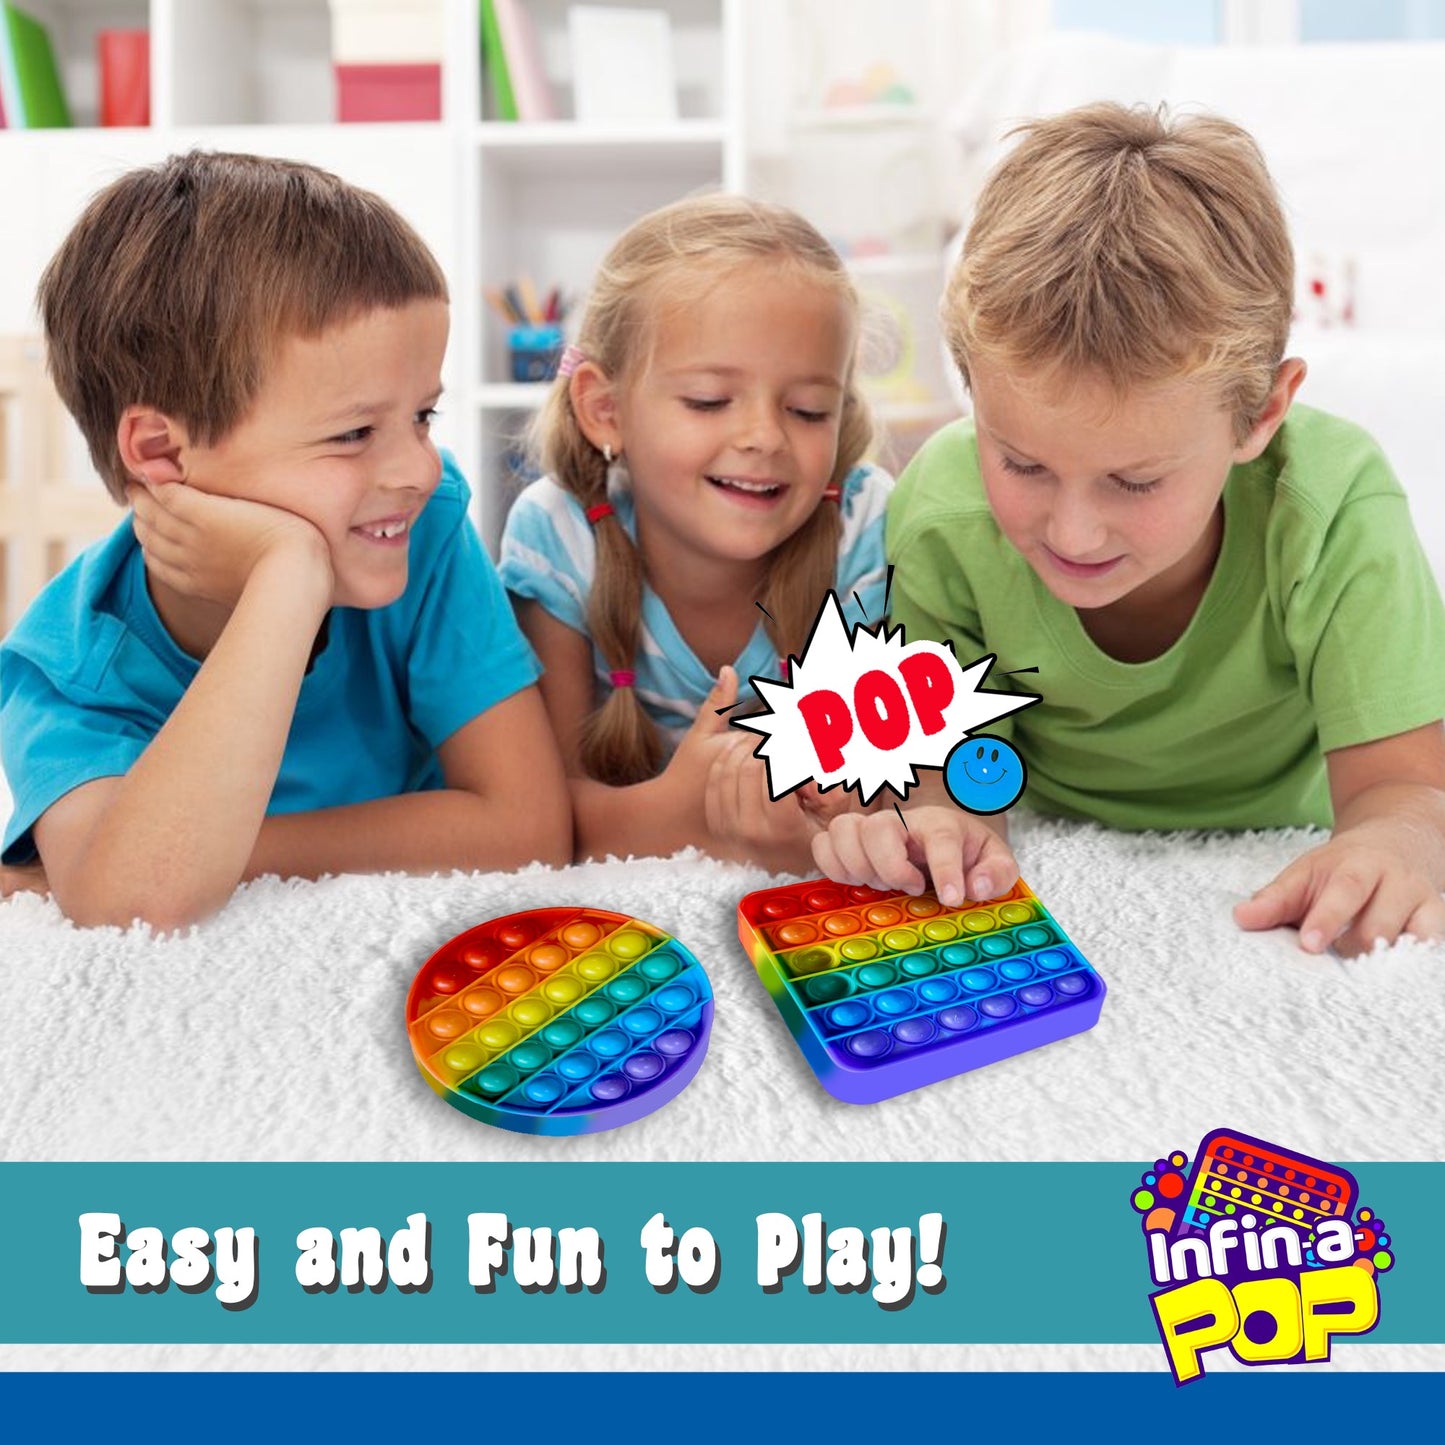 Infin-a-Pop Octagon: The Infinite Popping Toy and Game Rainbow Octagon Shape